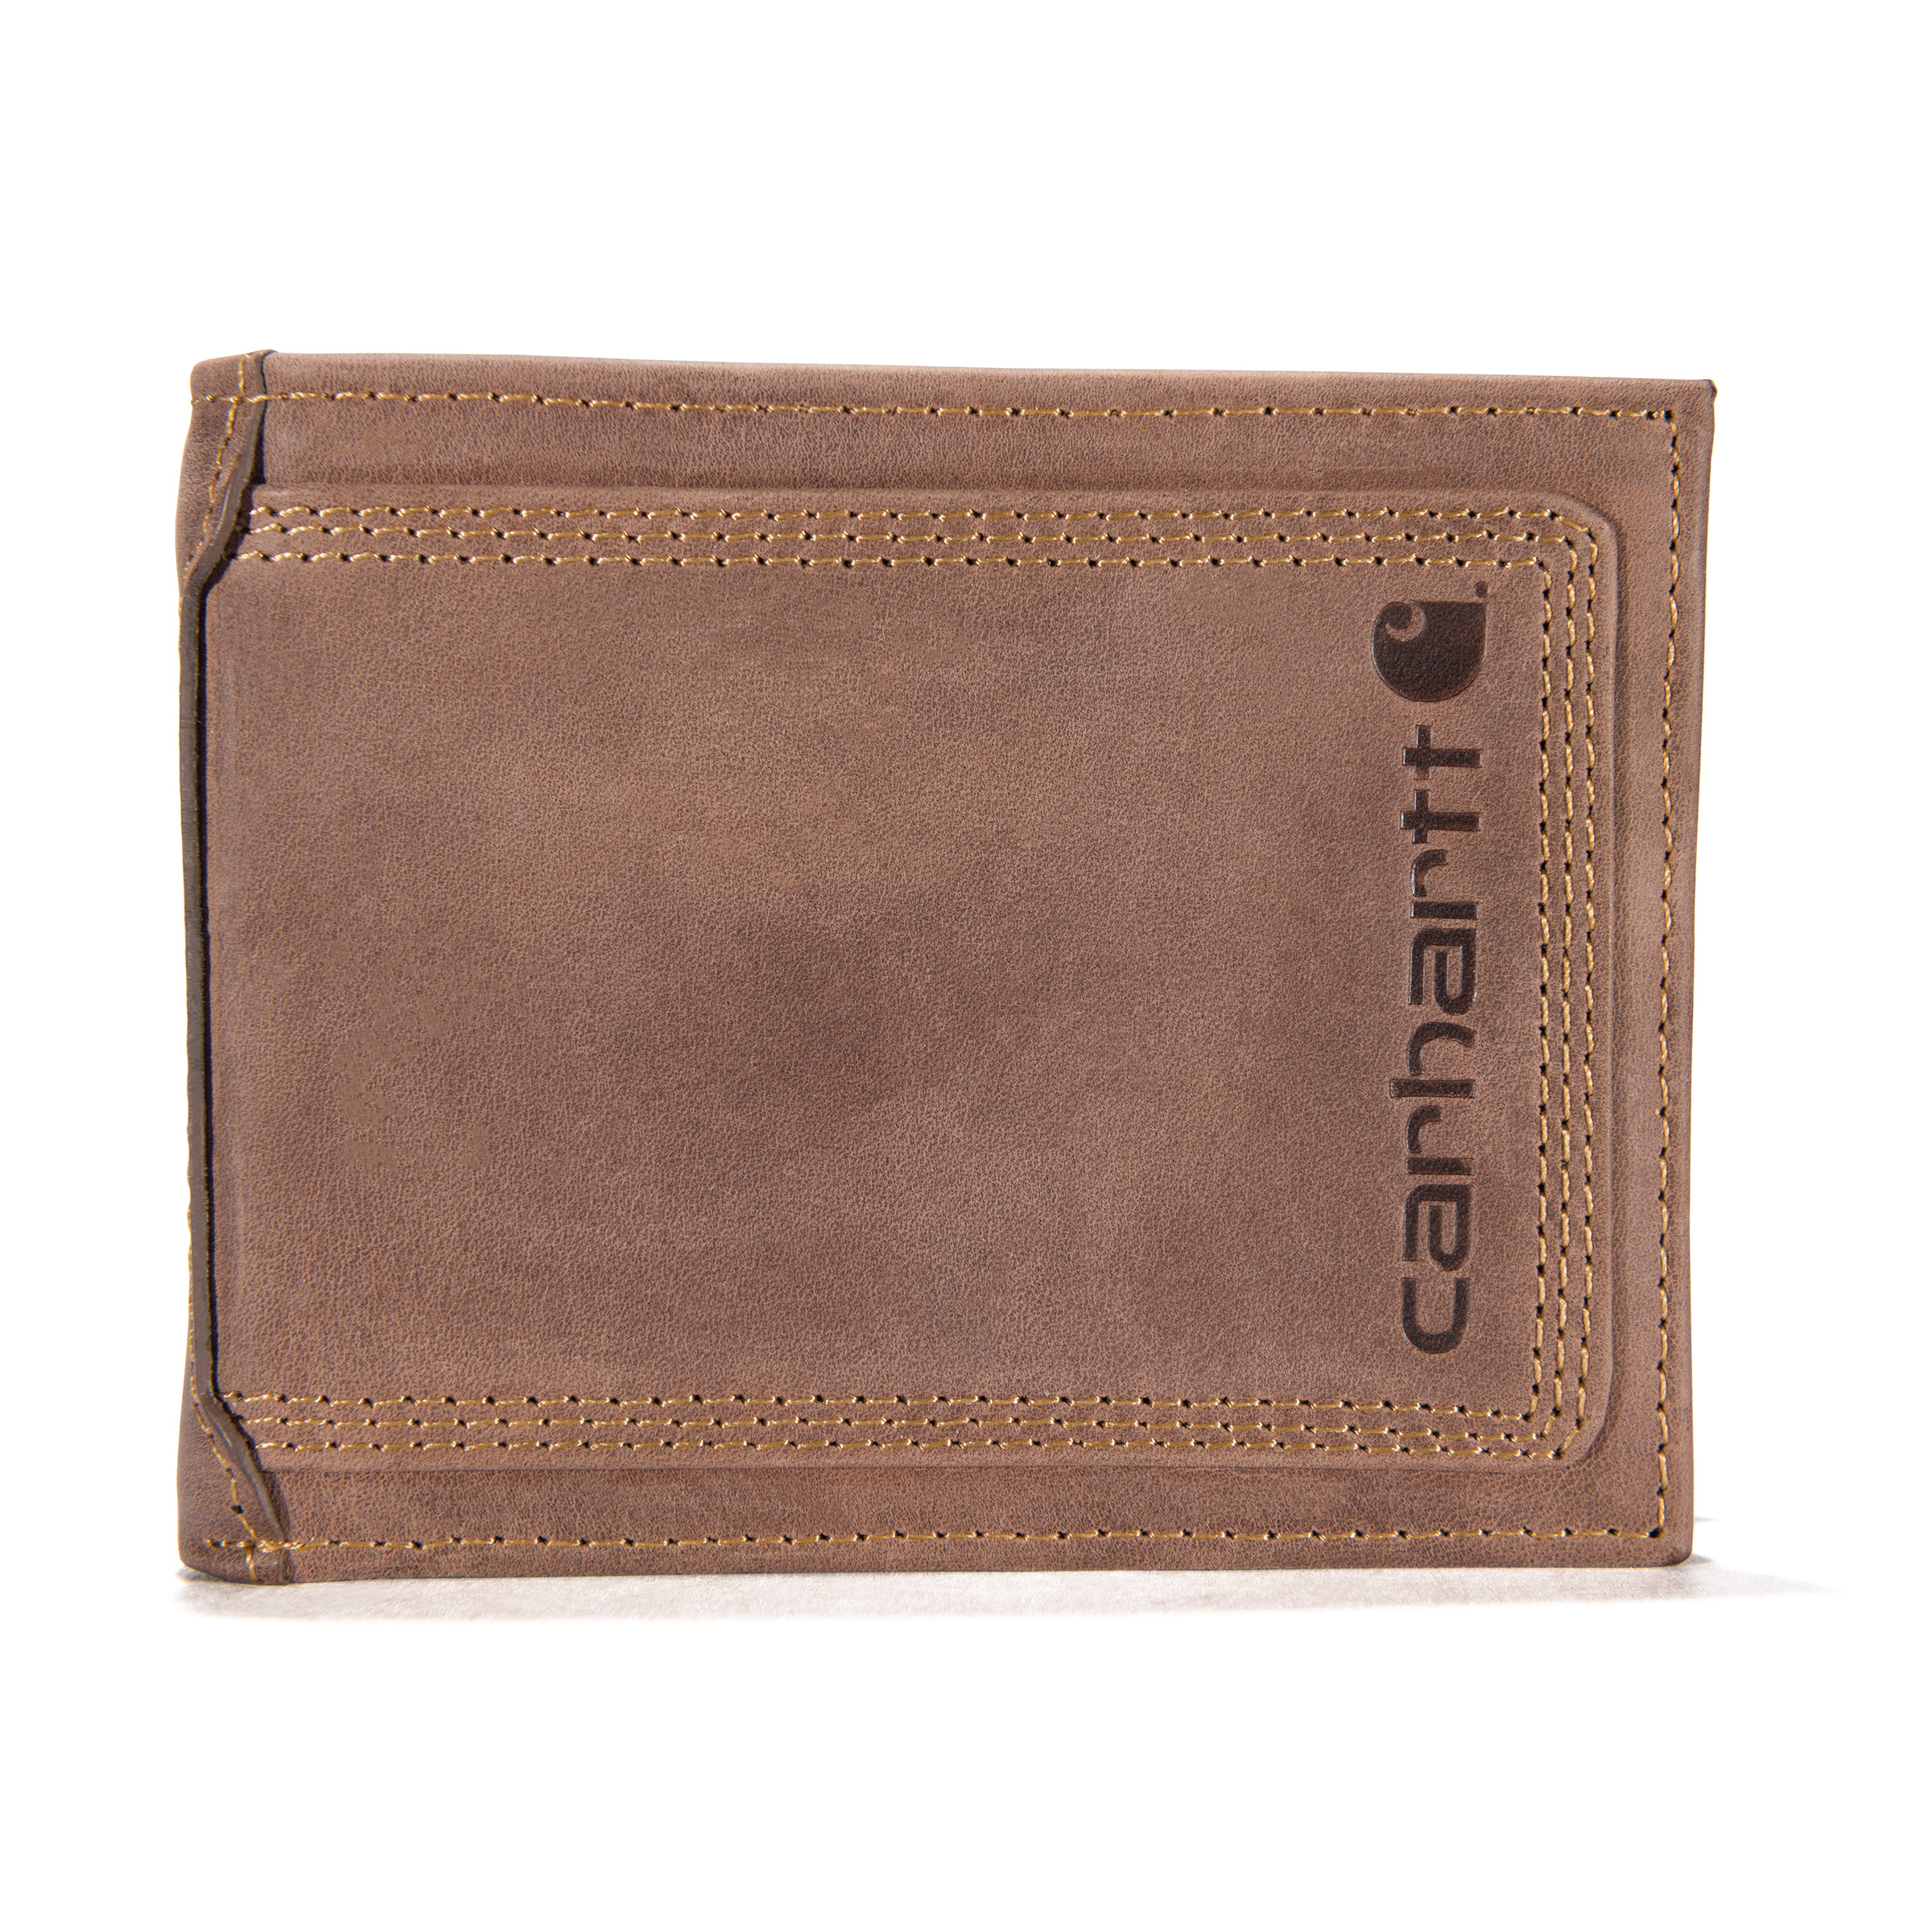 Picture of Carhartt B0000212 Mens Leather Triple-Stitched Passcase